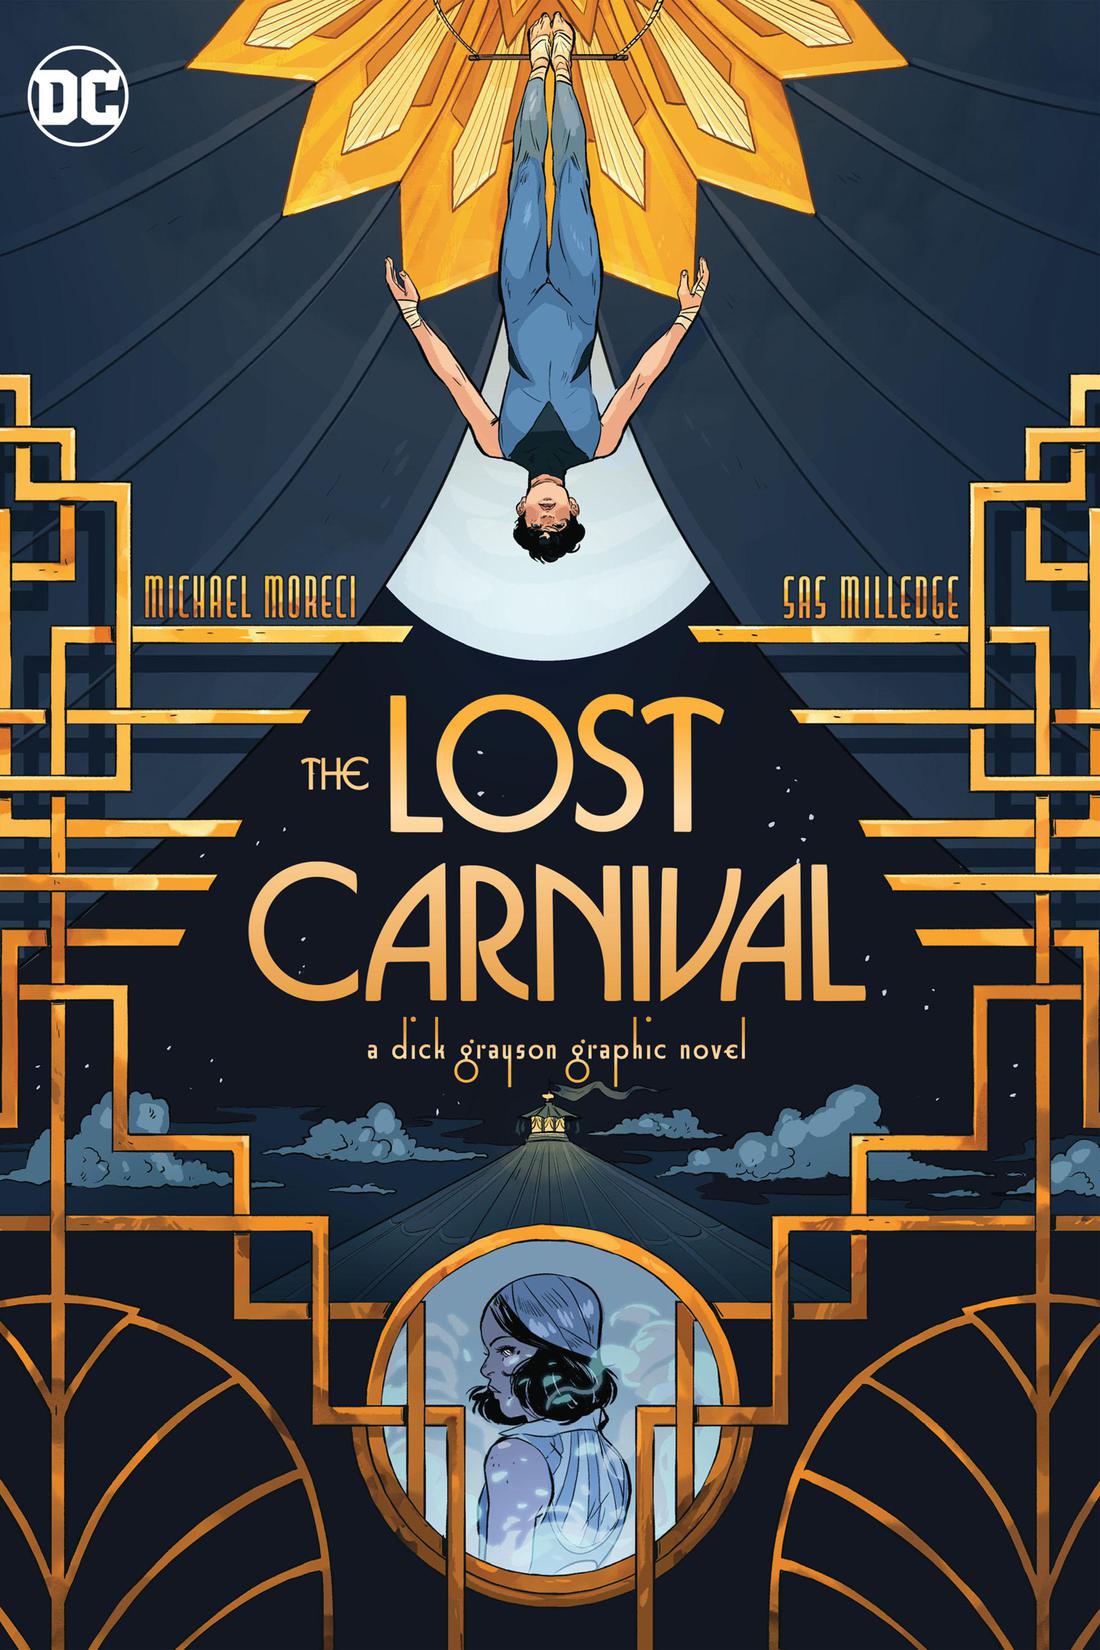 Lost Carnival: A Dick Grayson Graphic Novel preview images